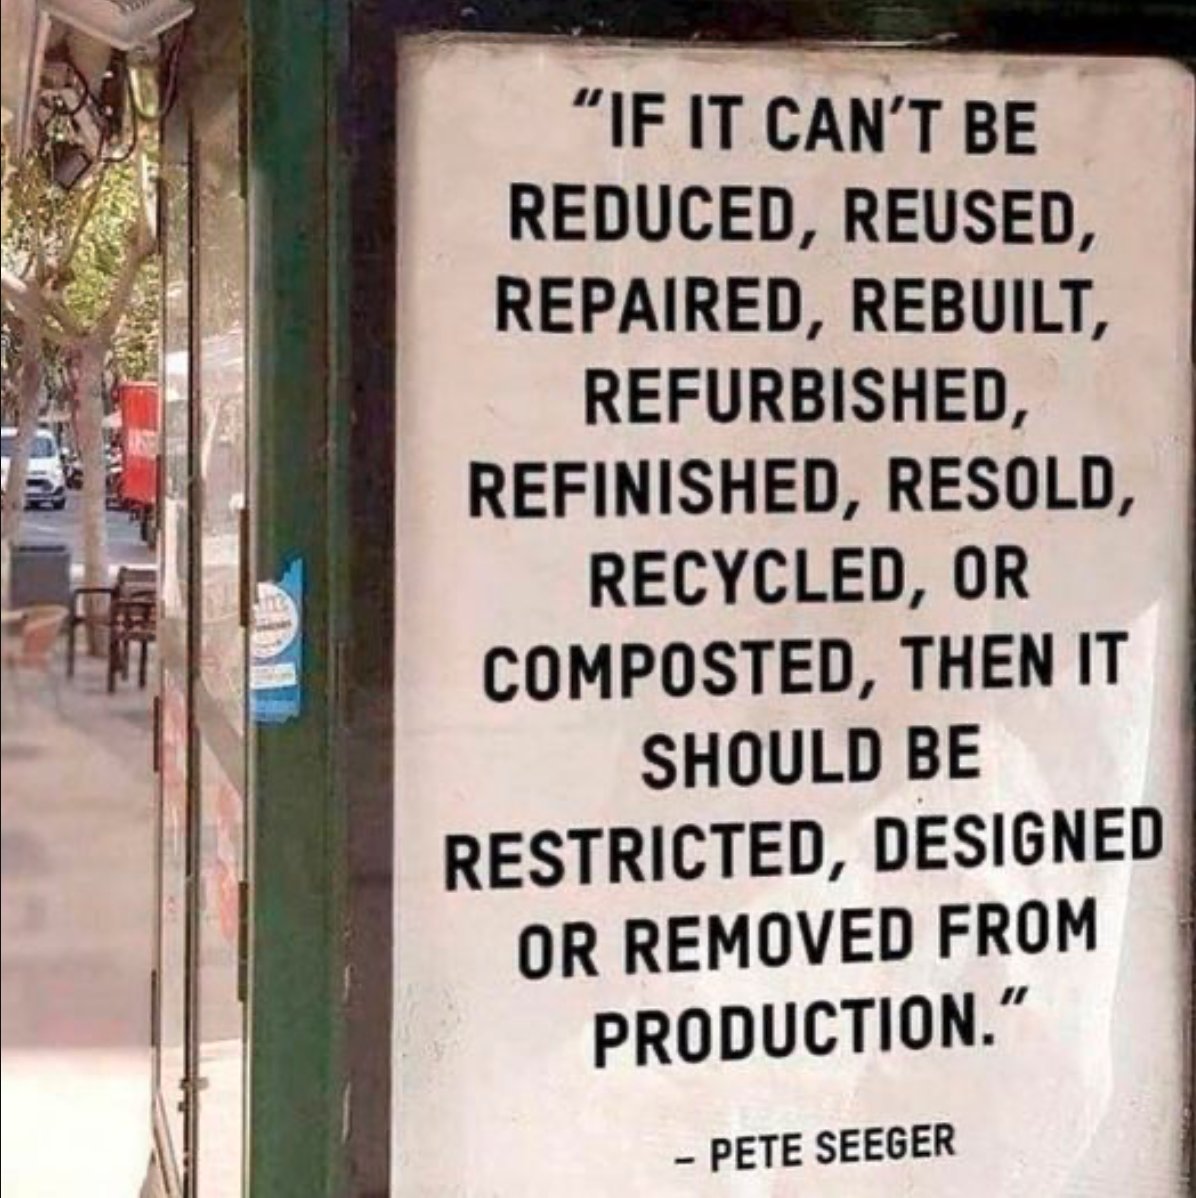 #TGIF If it can't be reduced, reused, repaired, rebuilt, refurbished, refinished, resold, recycled, or composted, then it would be restricted, designed or removed from production. #PeteSeeger